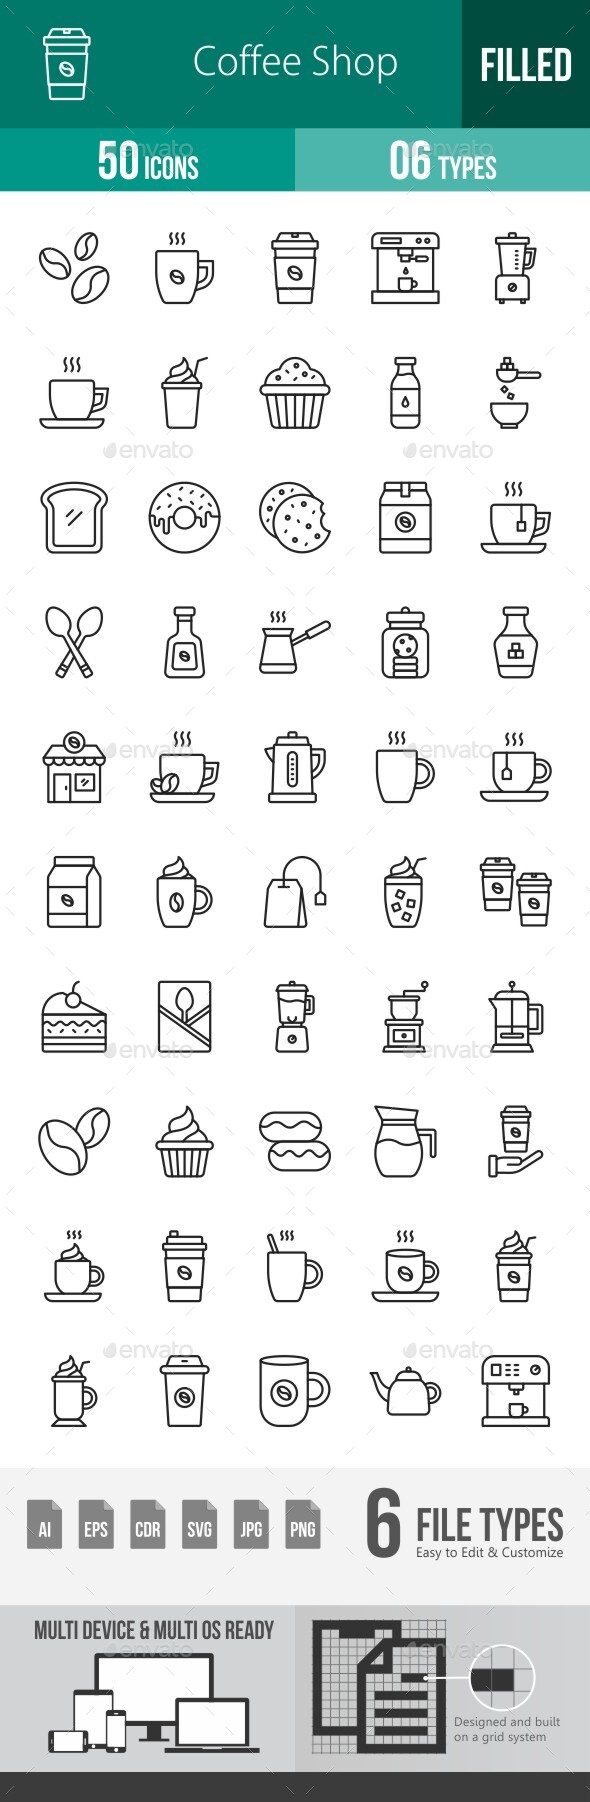 [DOWNLOAD]Coffee Shop Line Icons